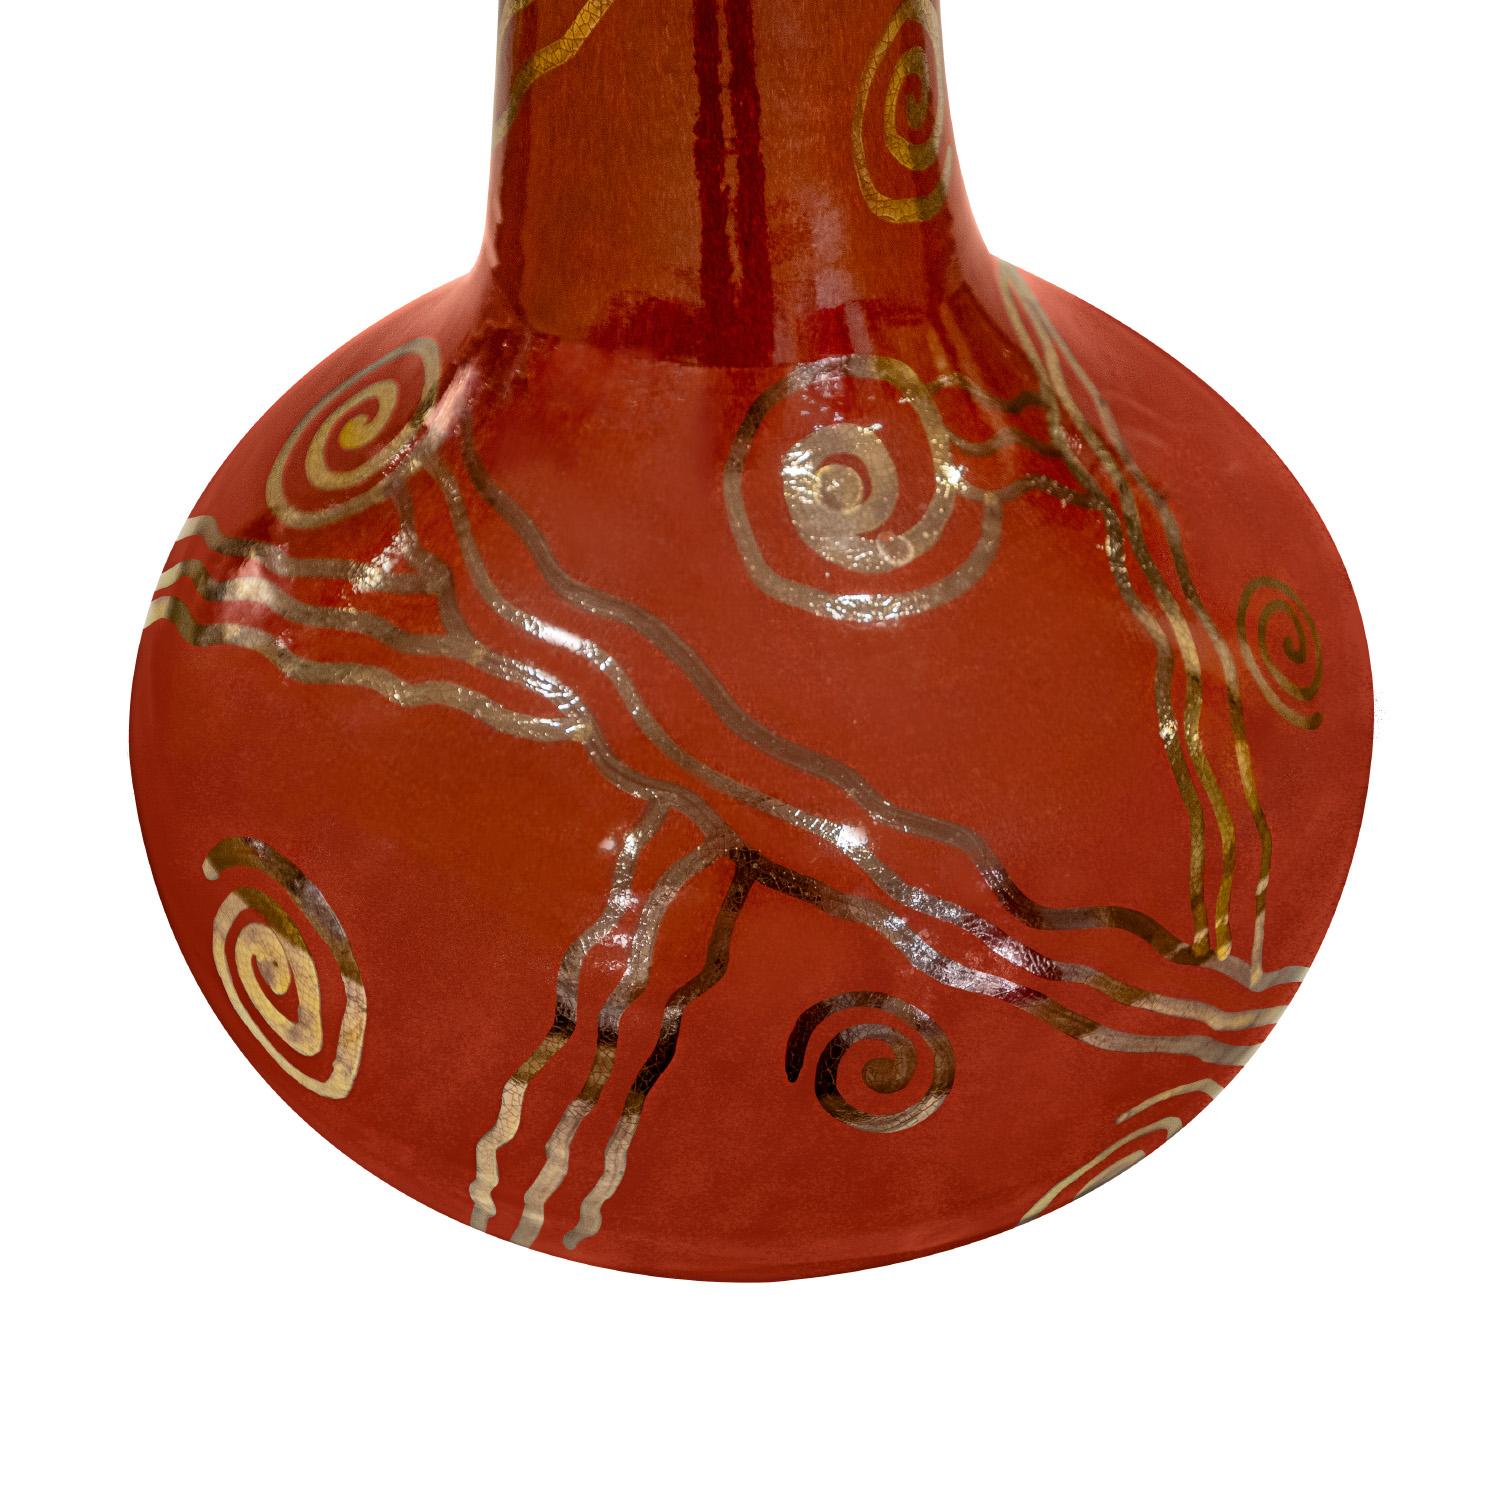 Gary McCloy Large Hand-Thrown Ceramic Vase 1970s (Signed) In Excellent Condition For Sale In New York, NY